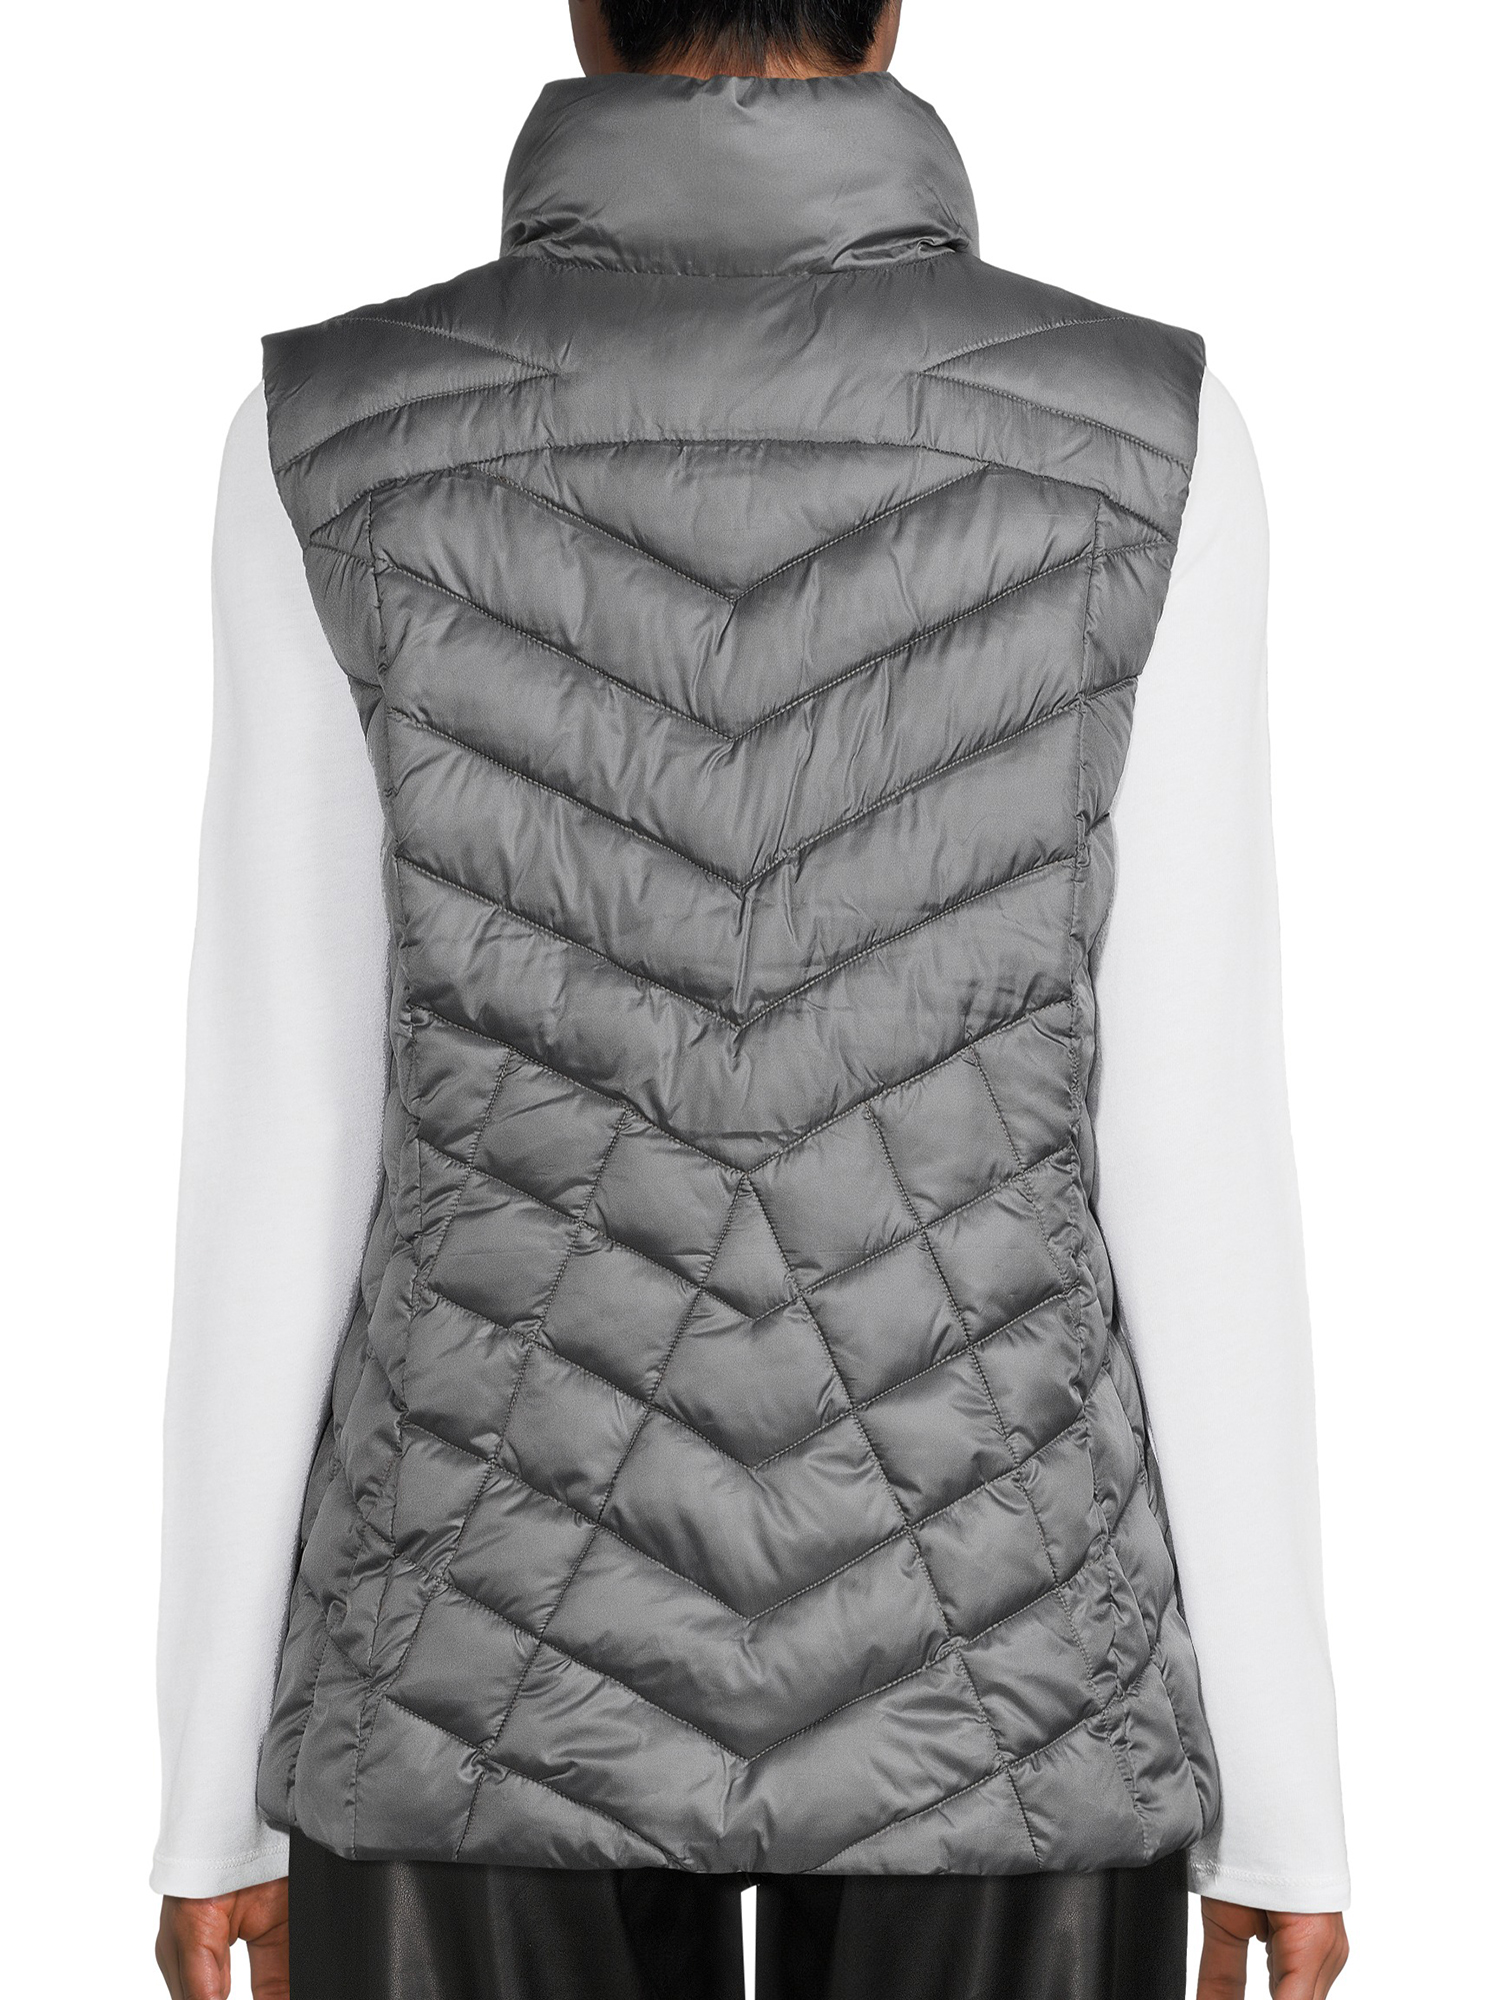 Big Chill Women's Chevron Quilted Puffer Vest - image 3 of 5